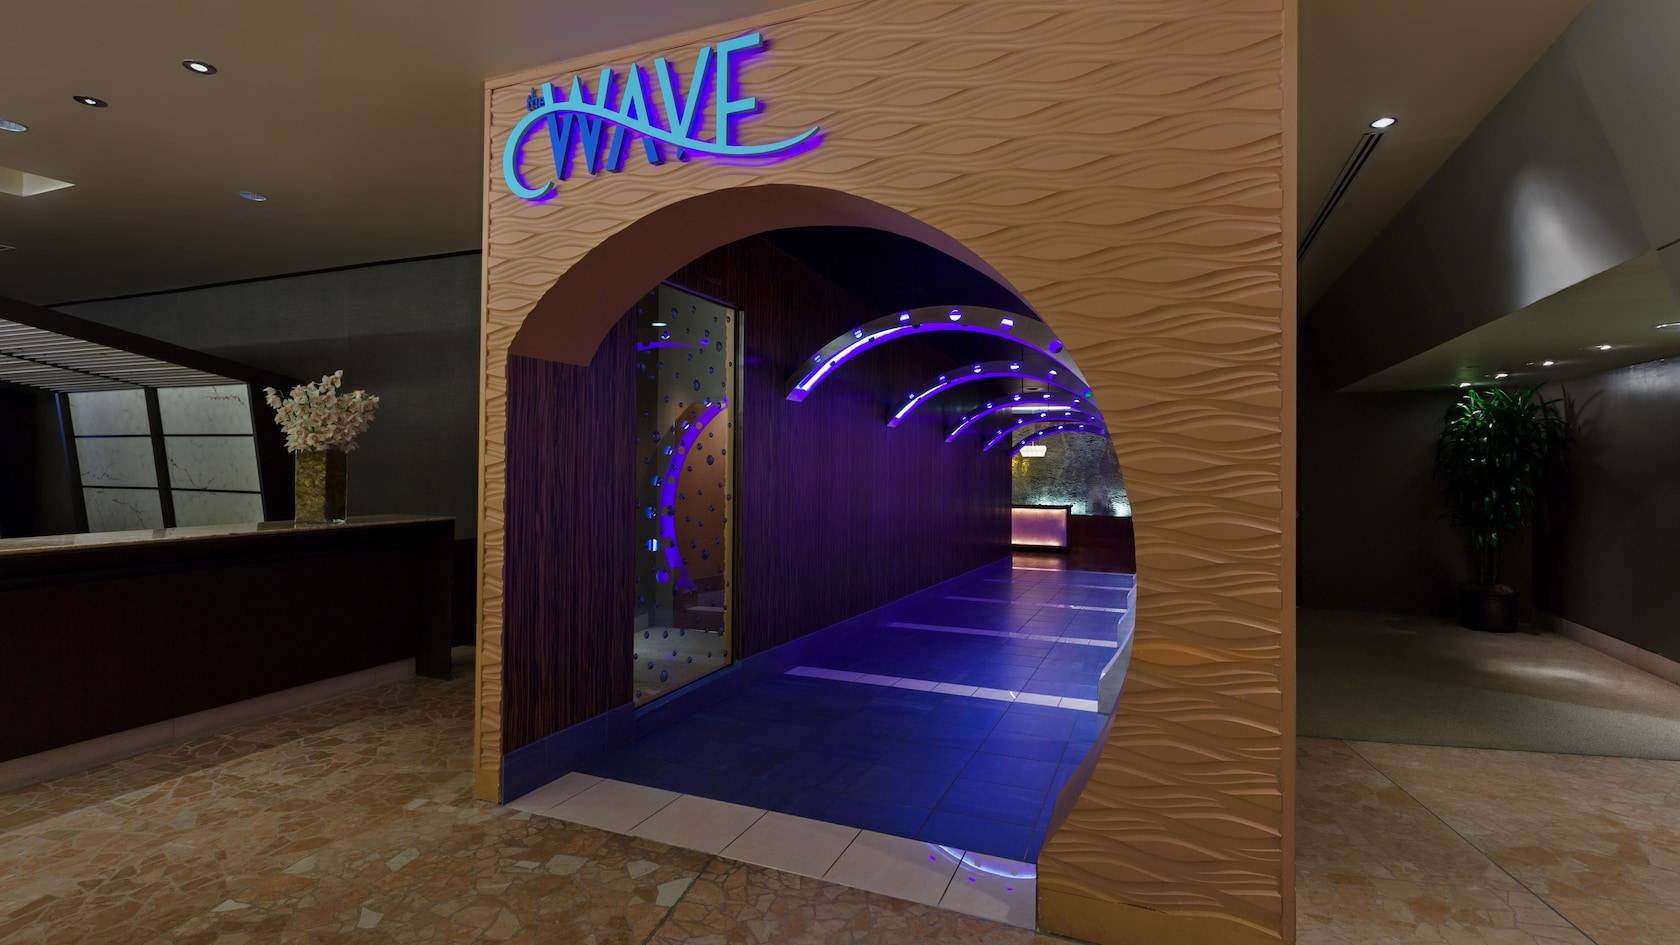 The Wave closing for refurbishment this summer at Disney's Contemporary Resort